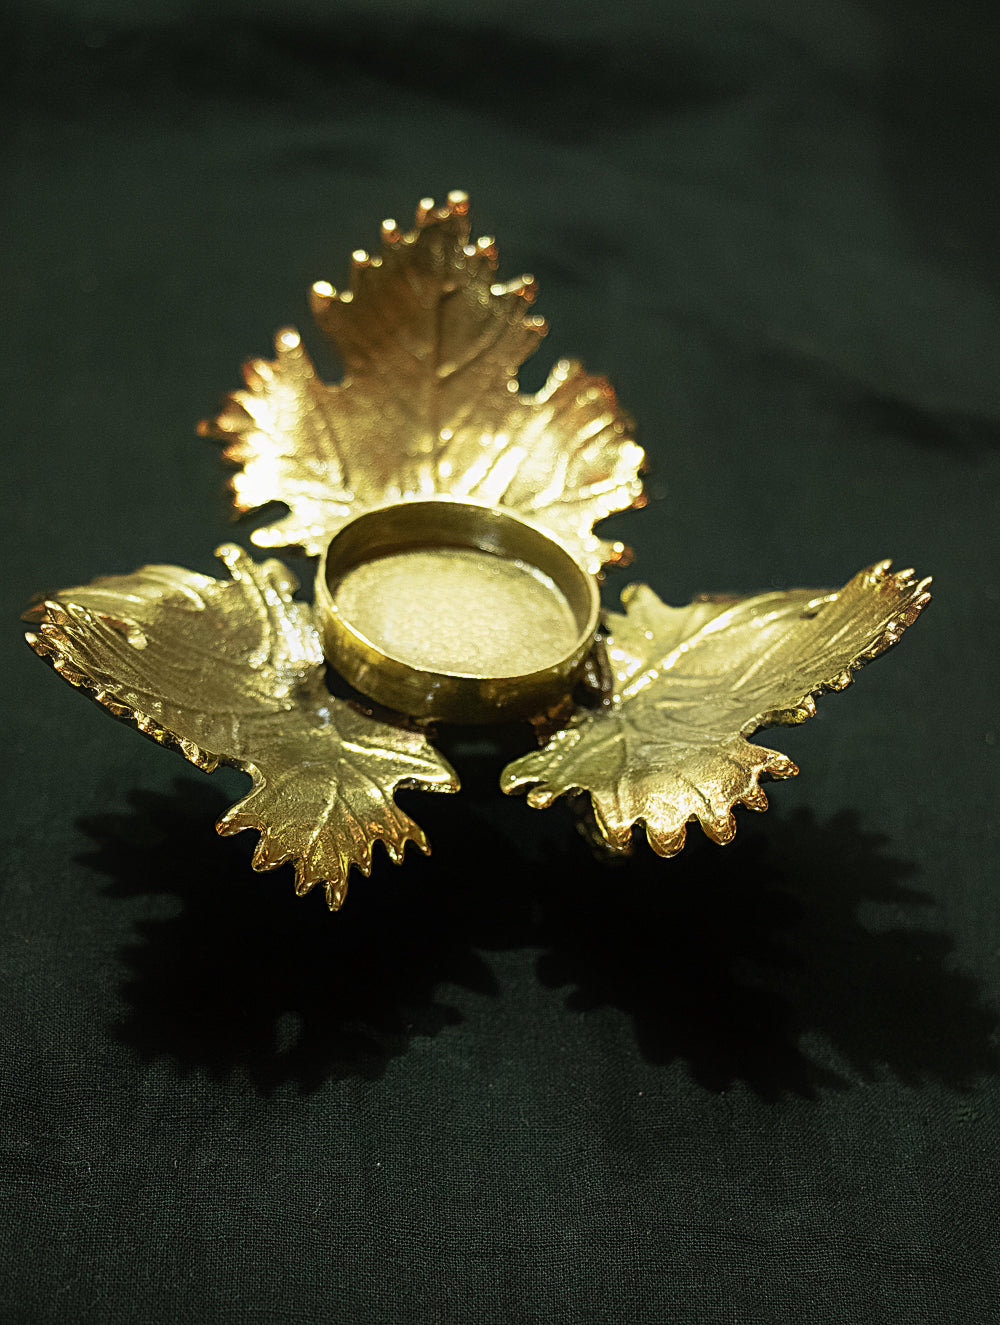 Load image into Gallery viewer, Brass Grape Leaf Tealight Holder - The India Craft House 